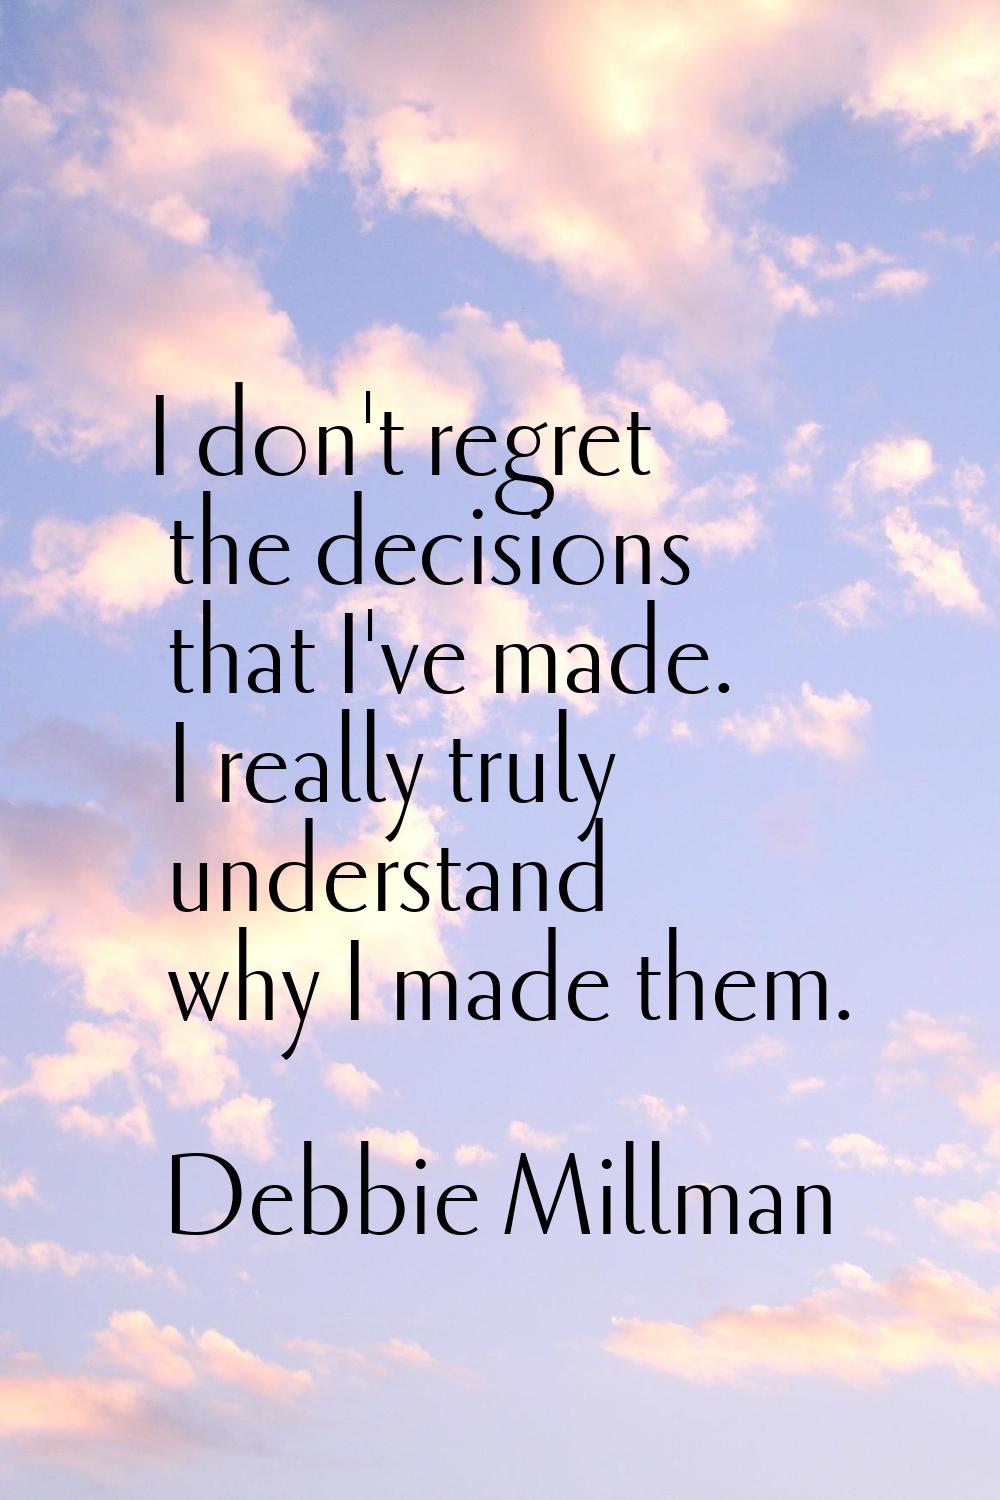 I don't regret the decisions that I've made. I really truly understand why I made them.